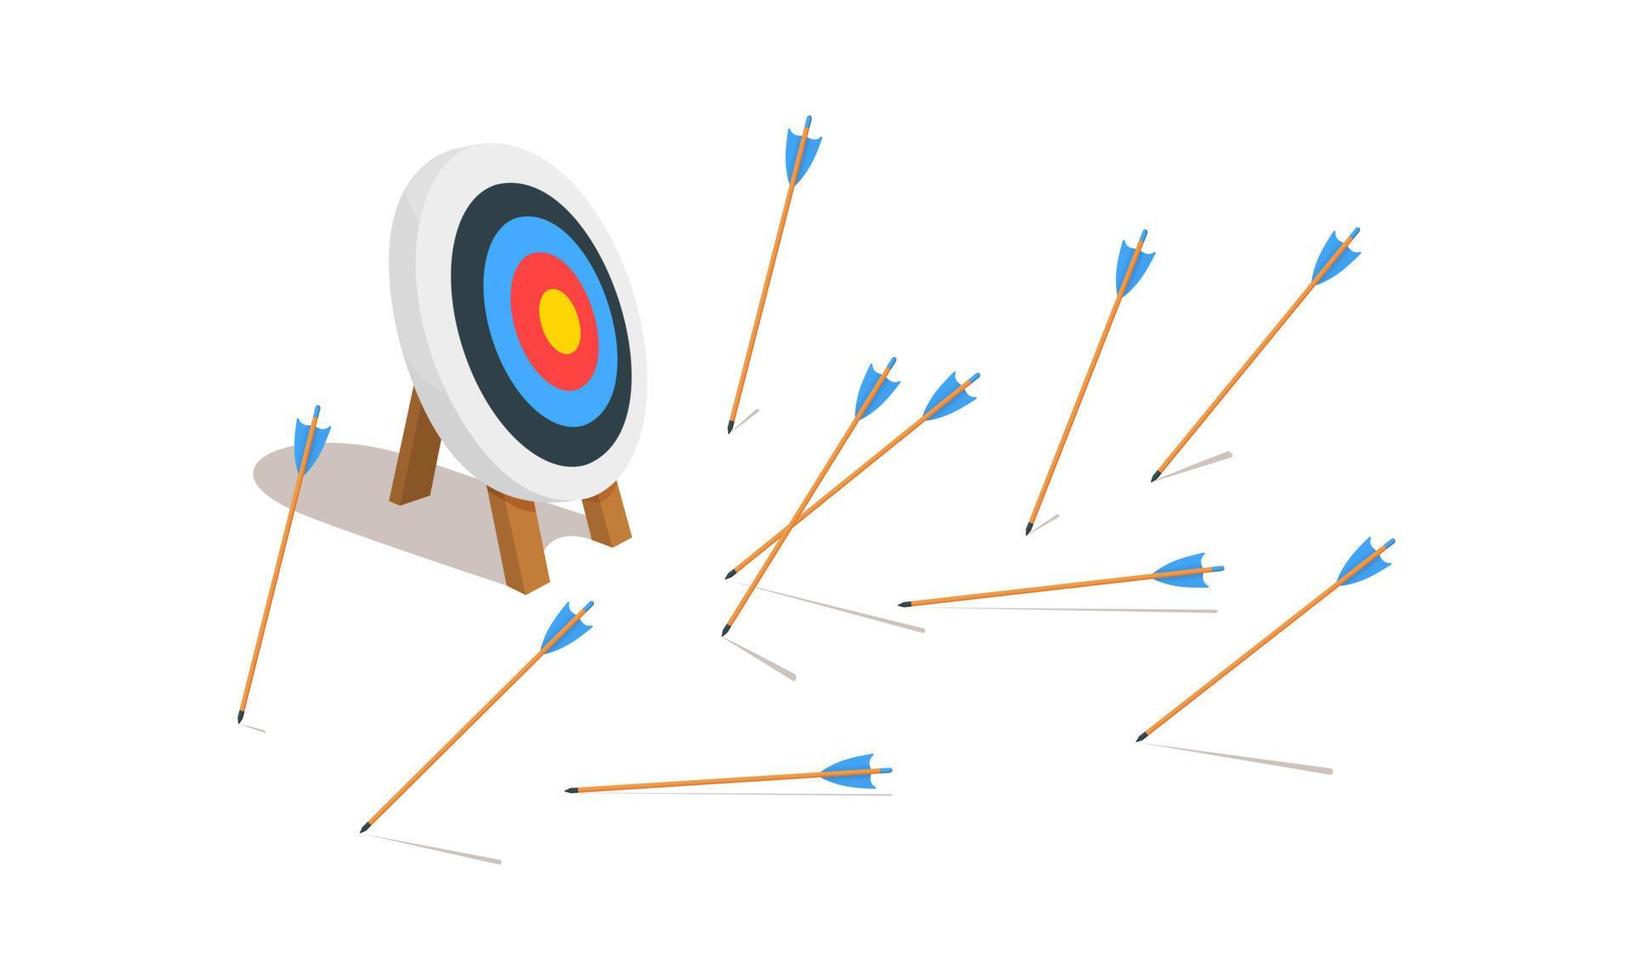 Archery target ring with many missed arrows. Business goal failure symbol. Mistake strategy concept vector